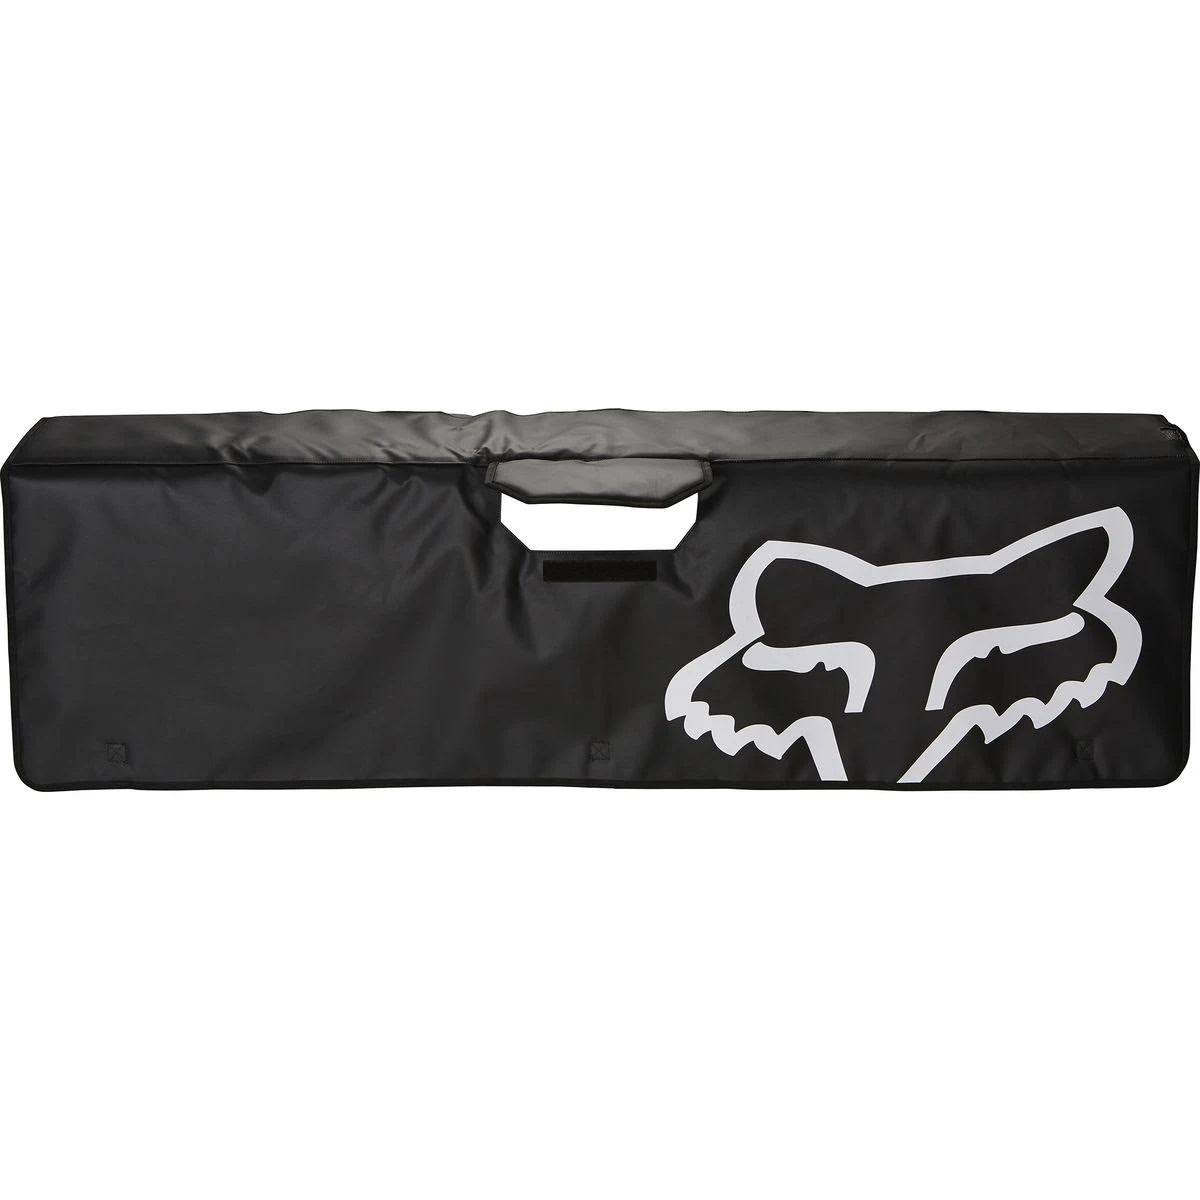 Fox Racing Protective Tailgate Cover - Black, Large